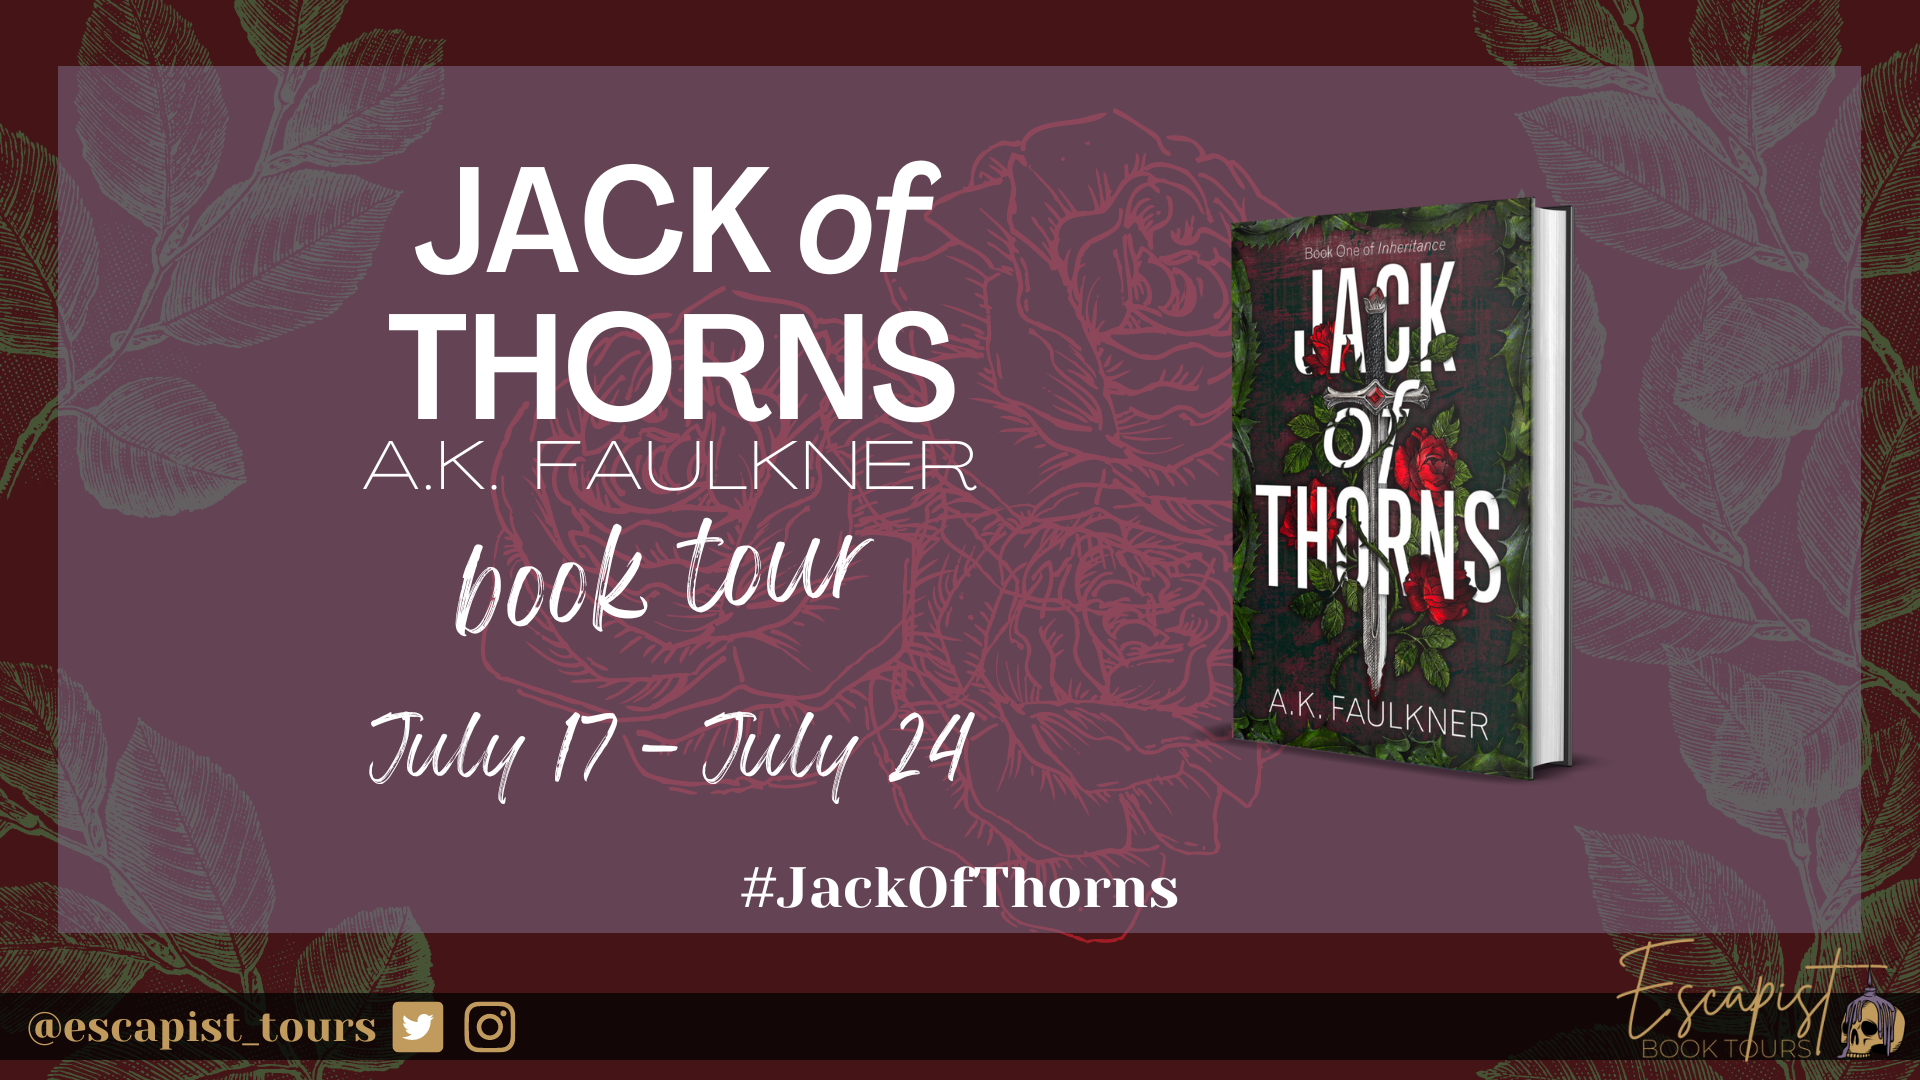 Jack of Thorns blog announcement